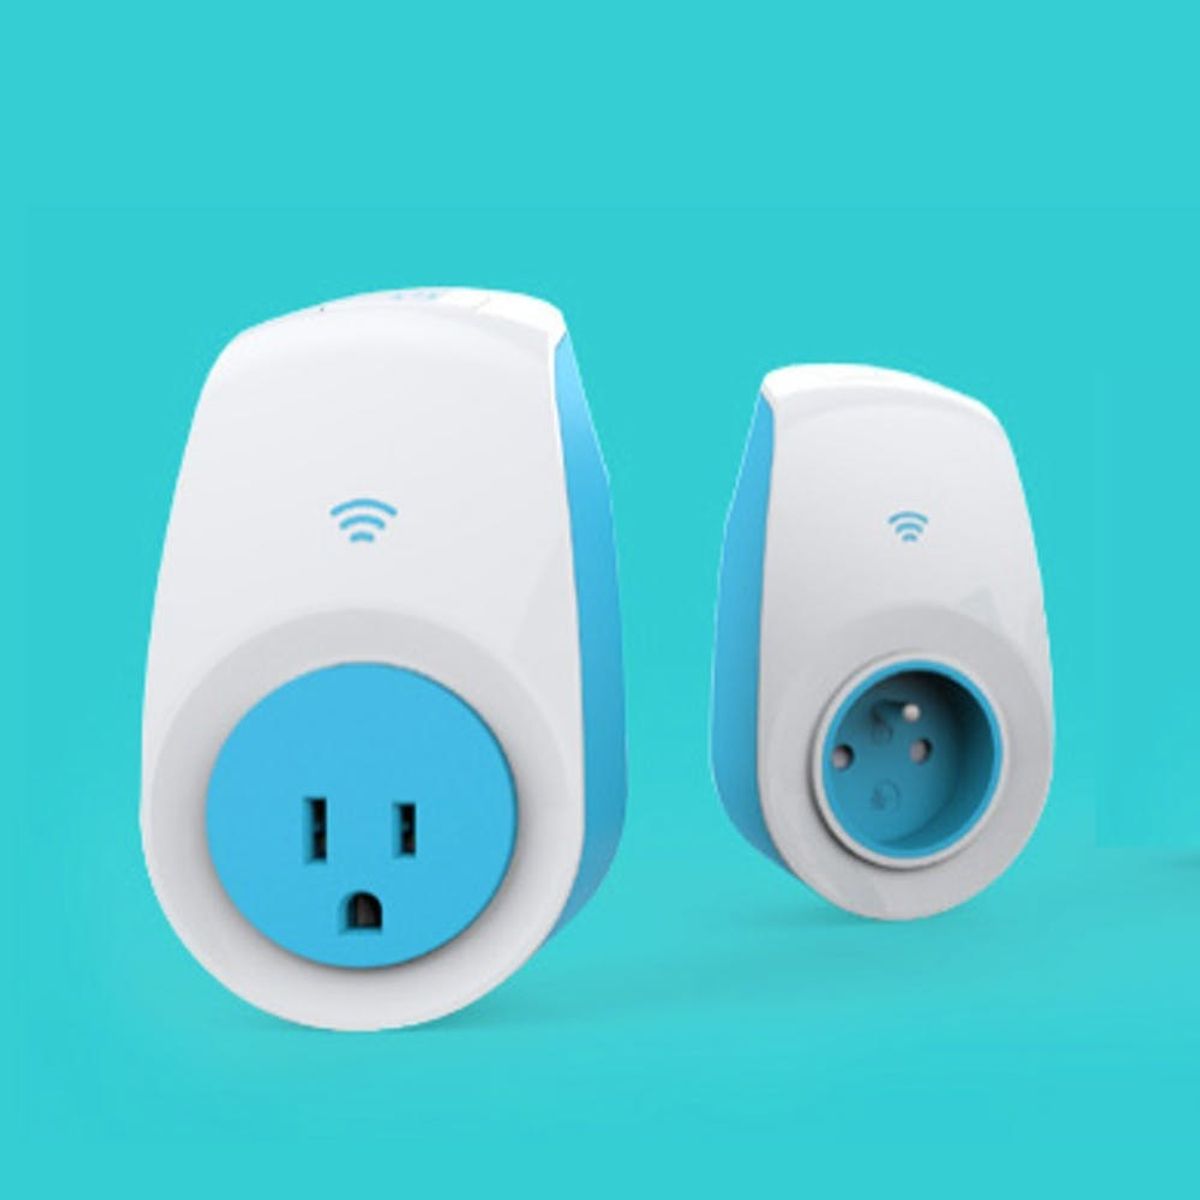 These Adorable Outlets Are All You Need for a Smart Home